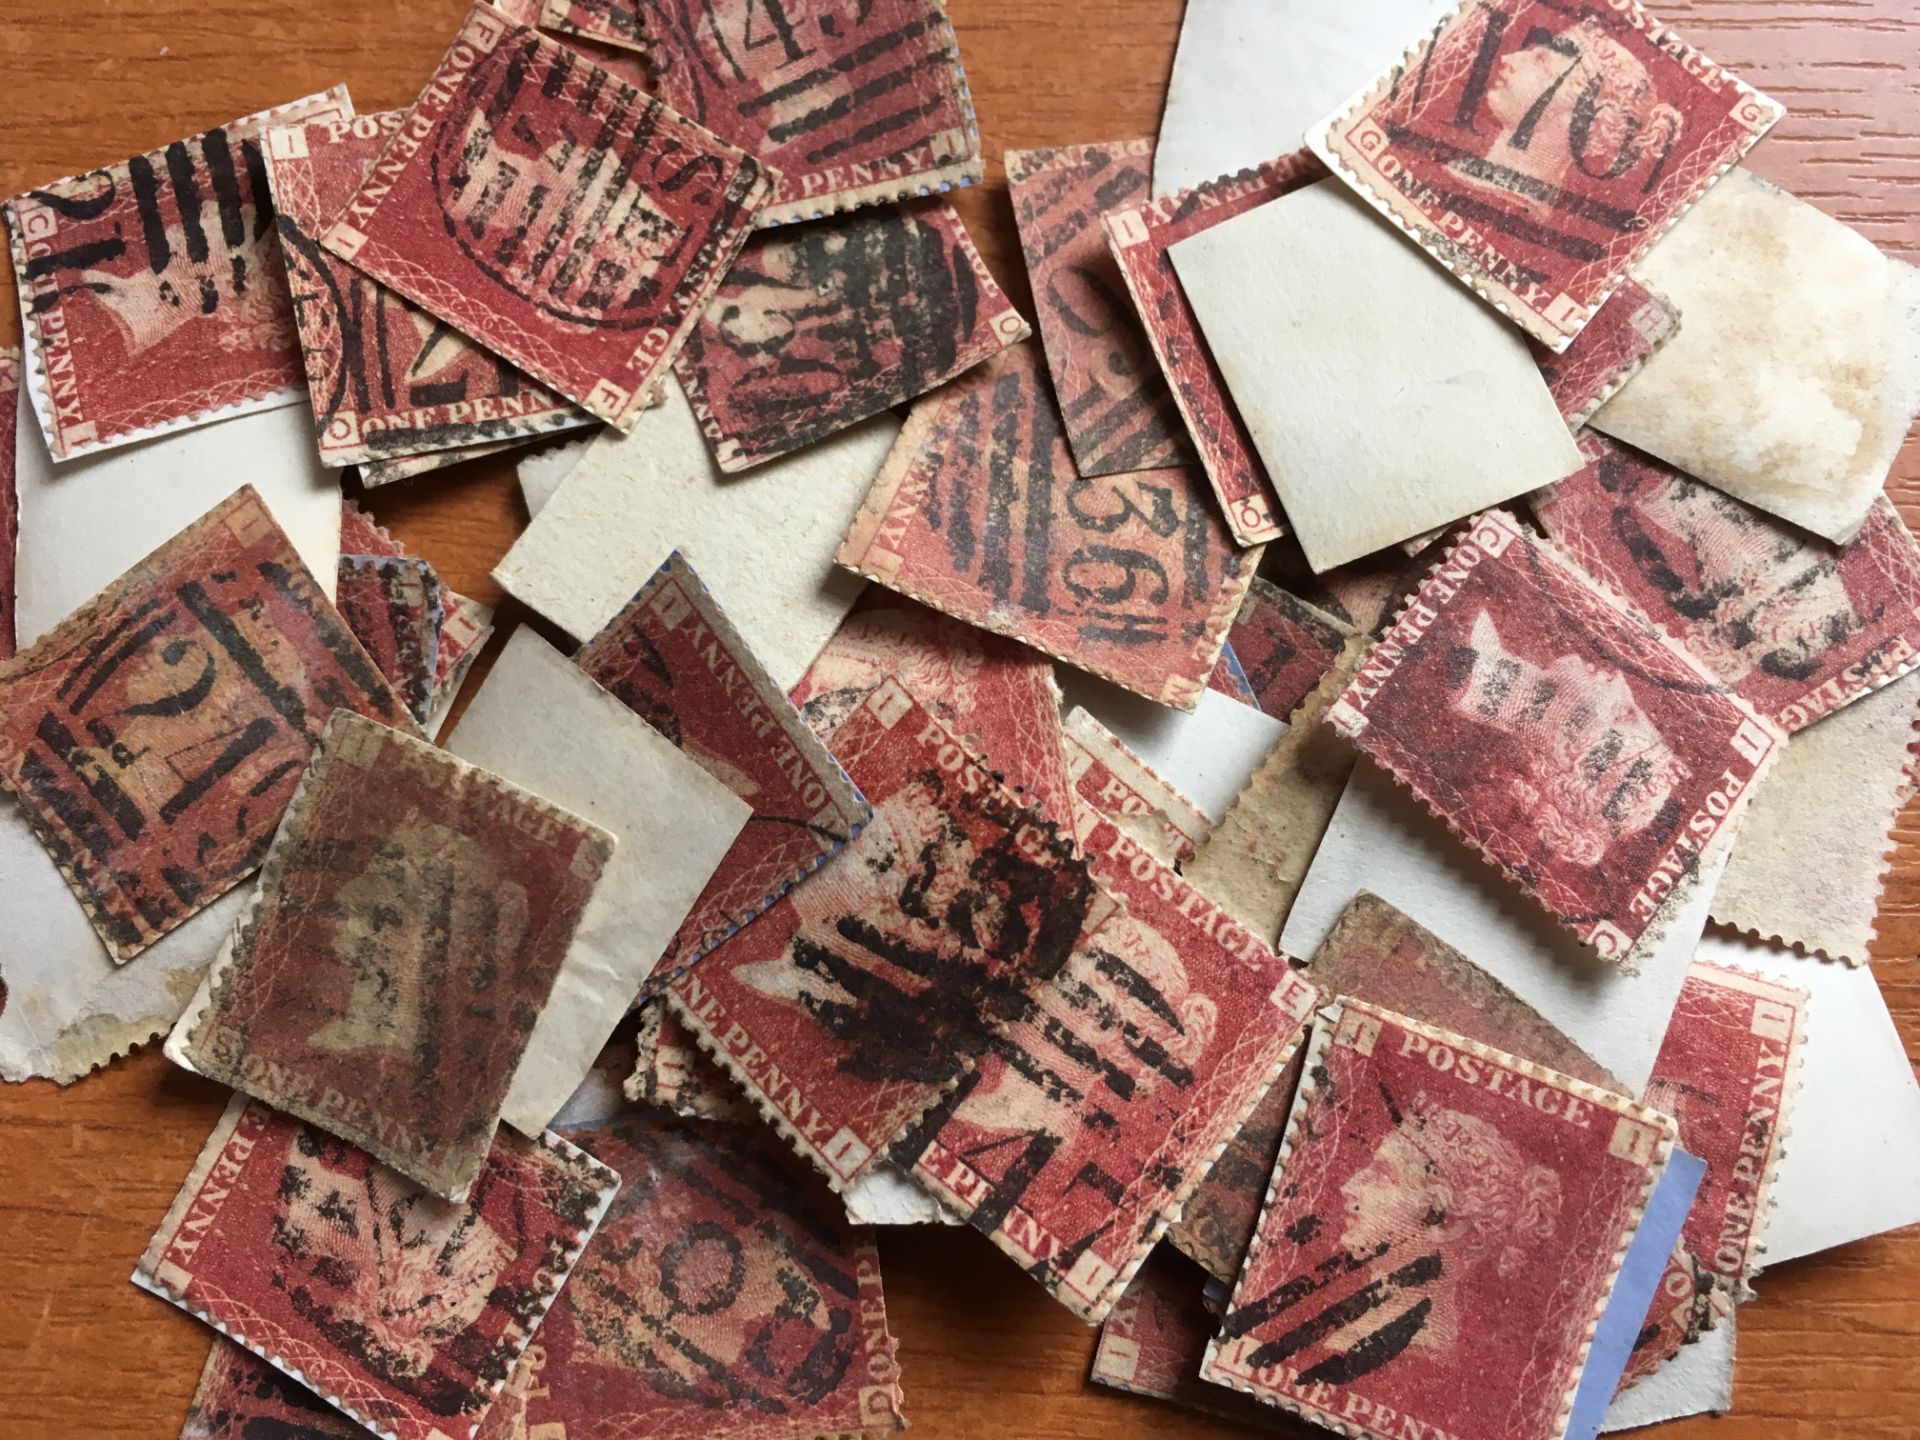 STAMPS: SMALL BOX WITH A QUANTITY OF GB PENNY REDS, SOME SORTED INTO ENVELOPES, - Image 4 of 6